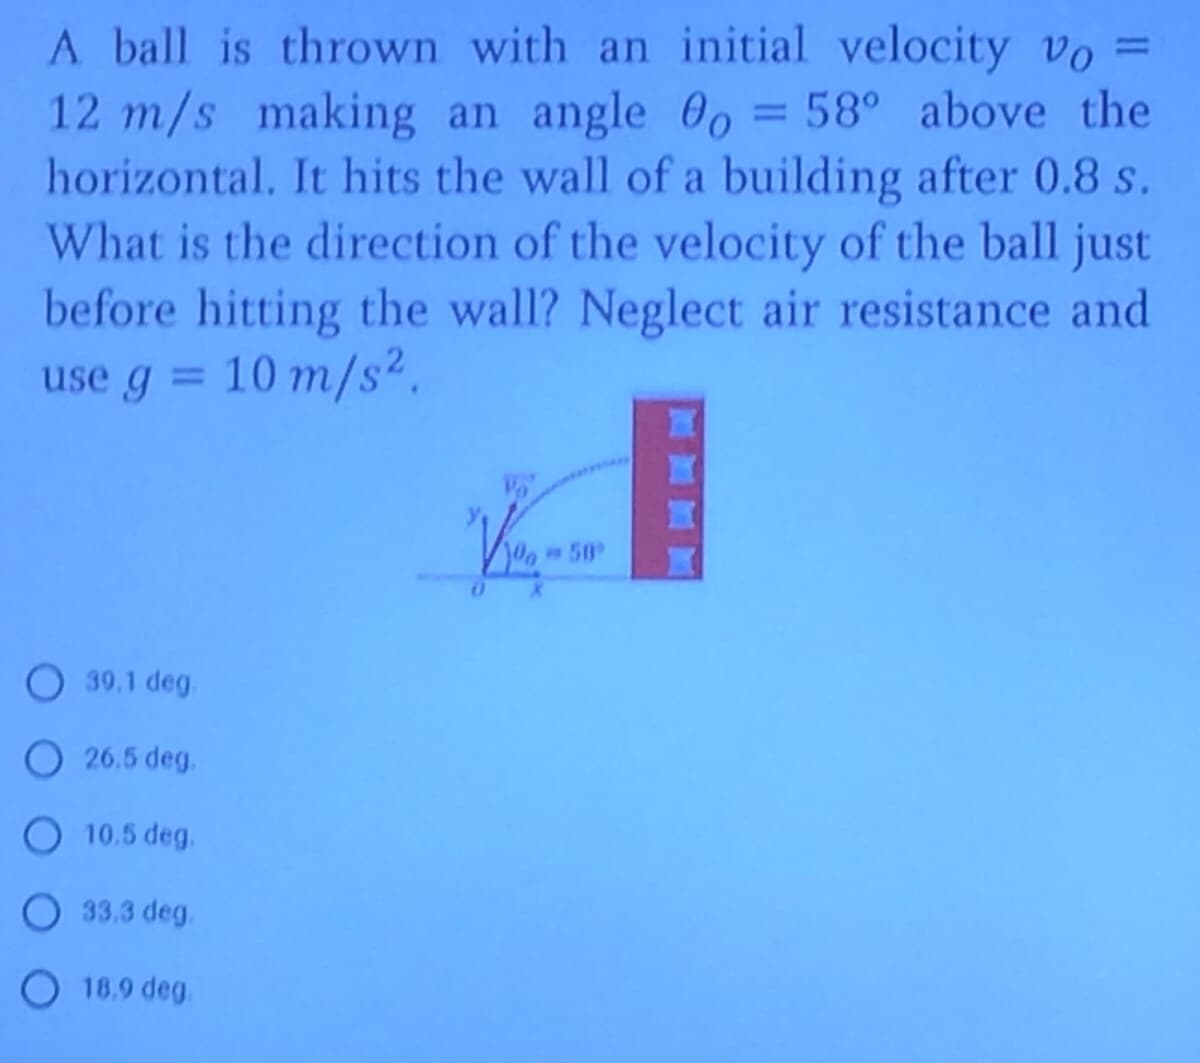 A ball is thrown with an initial velocity vo =
12 m/s making an angle 0o = 58° above the
horizontal. It hits the wall of a building after 0.8 s.
What is the direction of the velocity of the ball just
before hitting the wall? Neglect air resistance and
use g = 10 m/s2.
%3D
%3D
O 39.1 deg.
O 26.5 deg.
O 10.5 deg.
O 33.3 deg.
O 18.9 deg.
ORY
